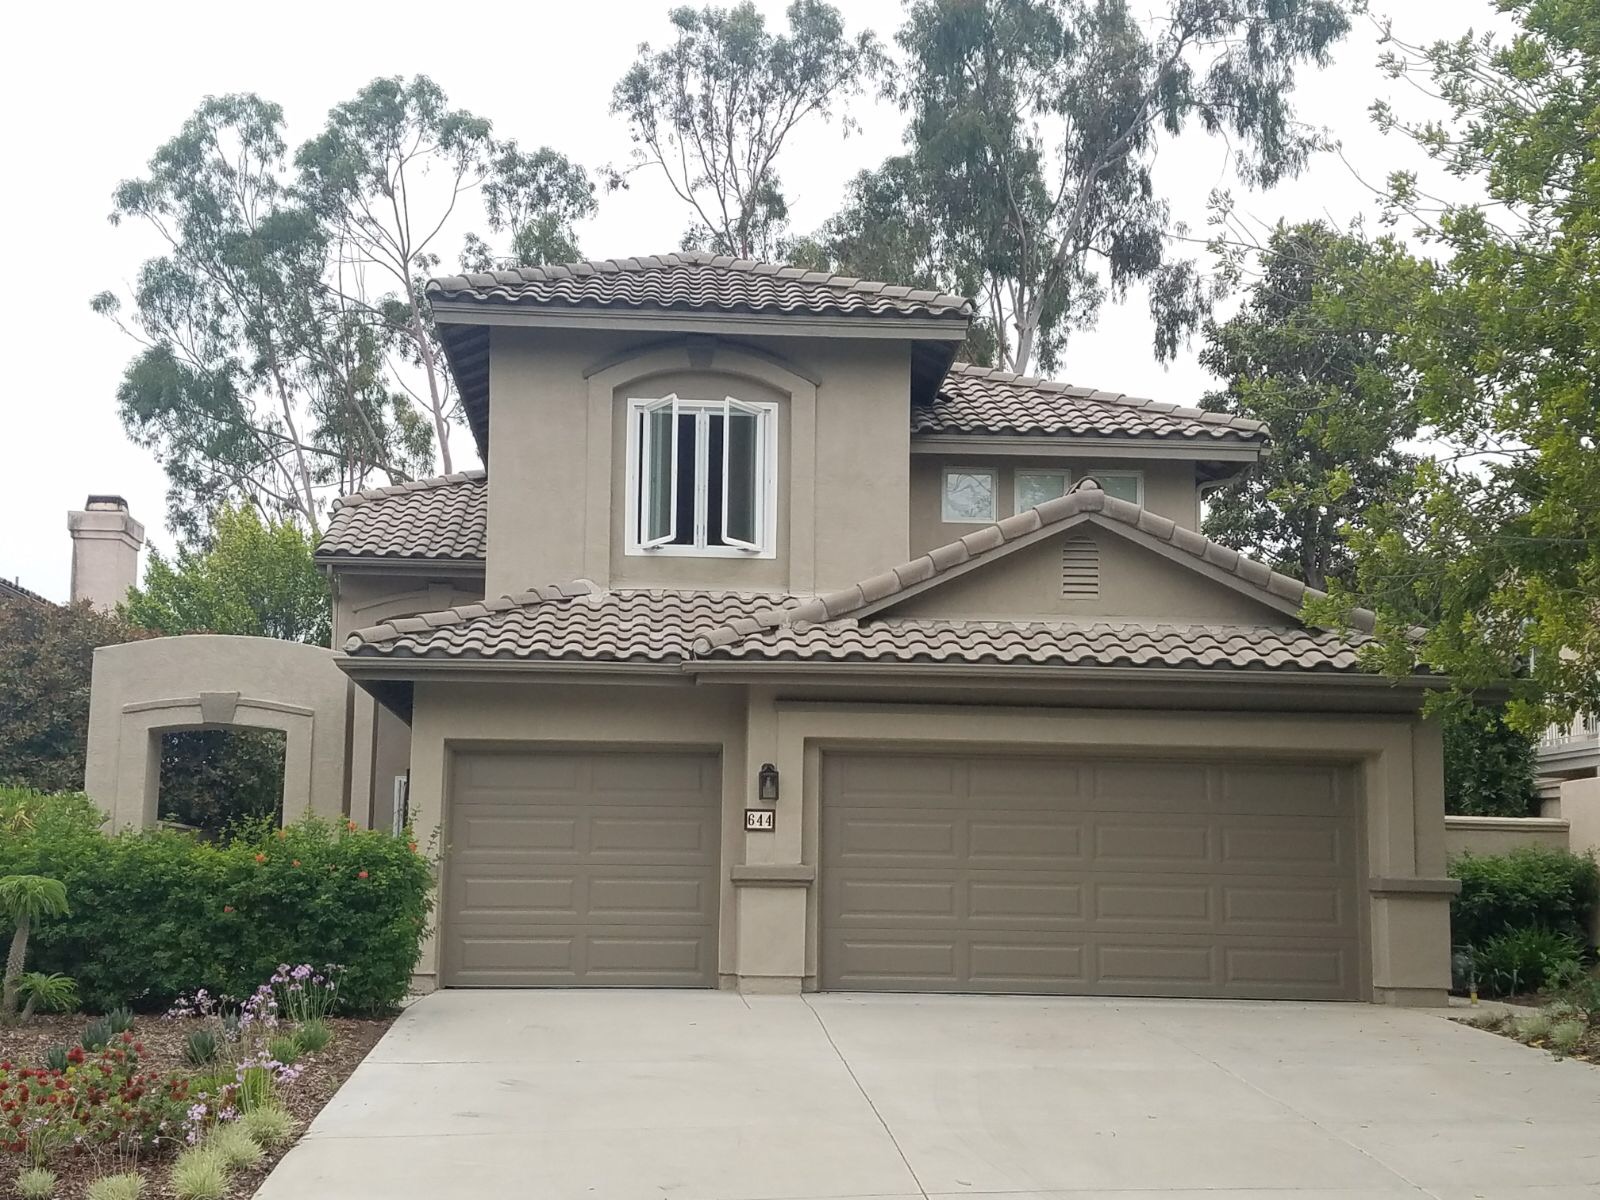 CertaPro Painters in Escondido, CA are your Exterior painting experts